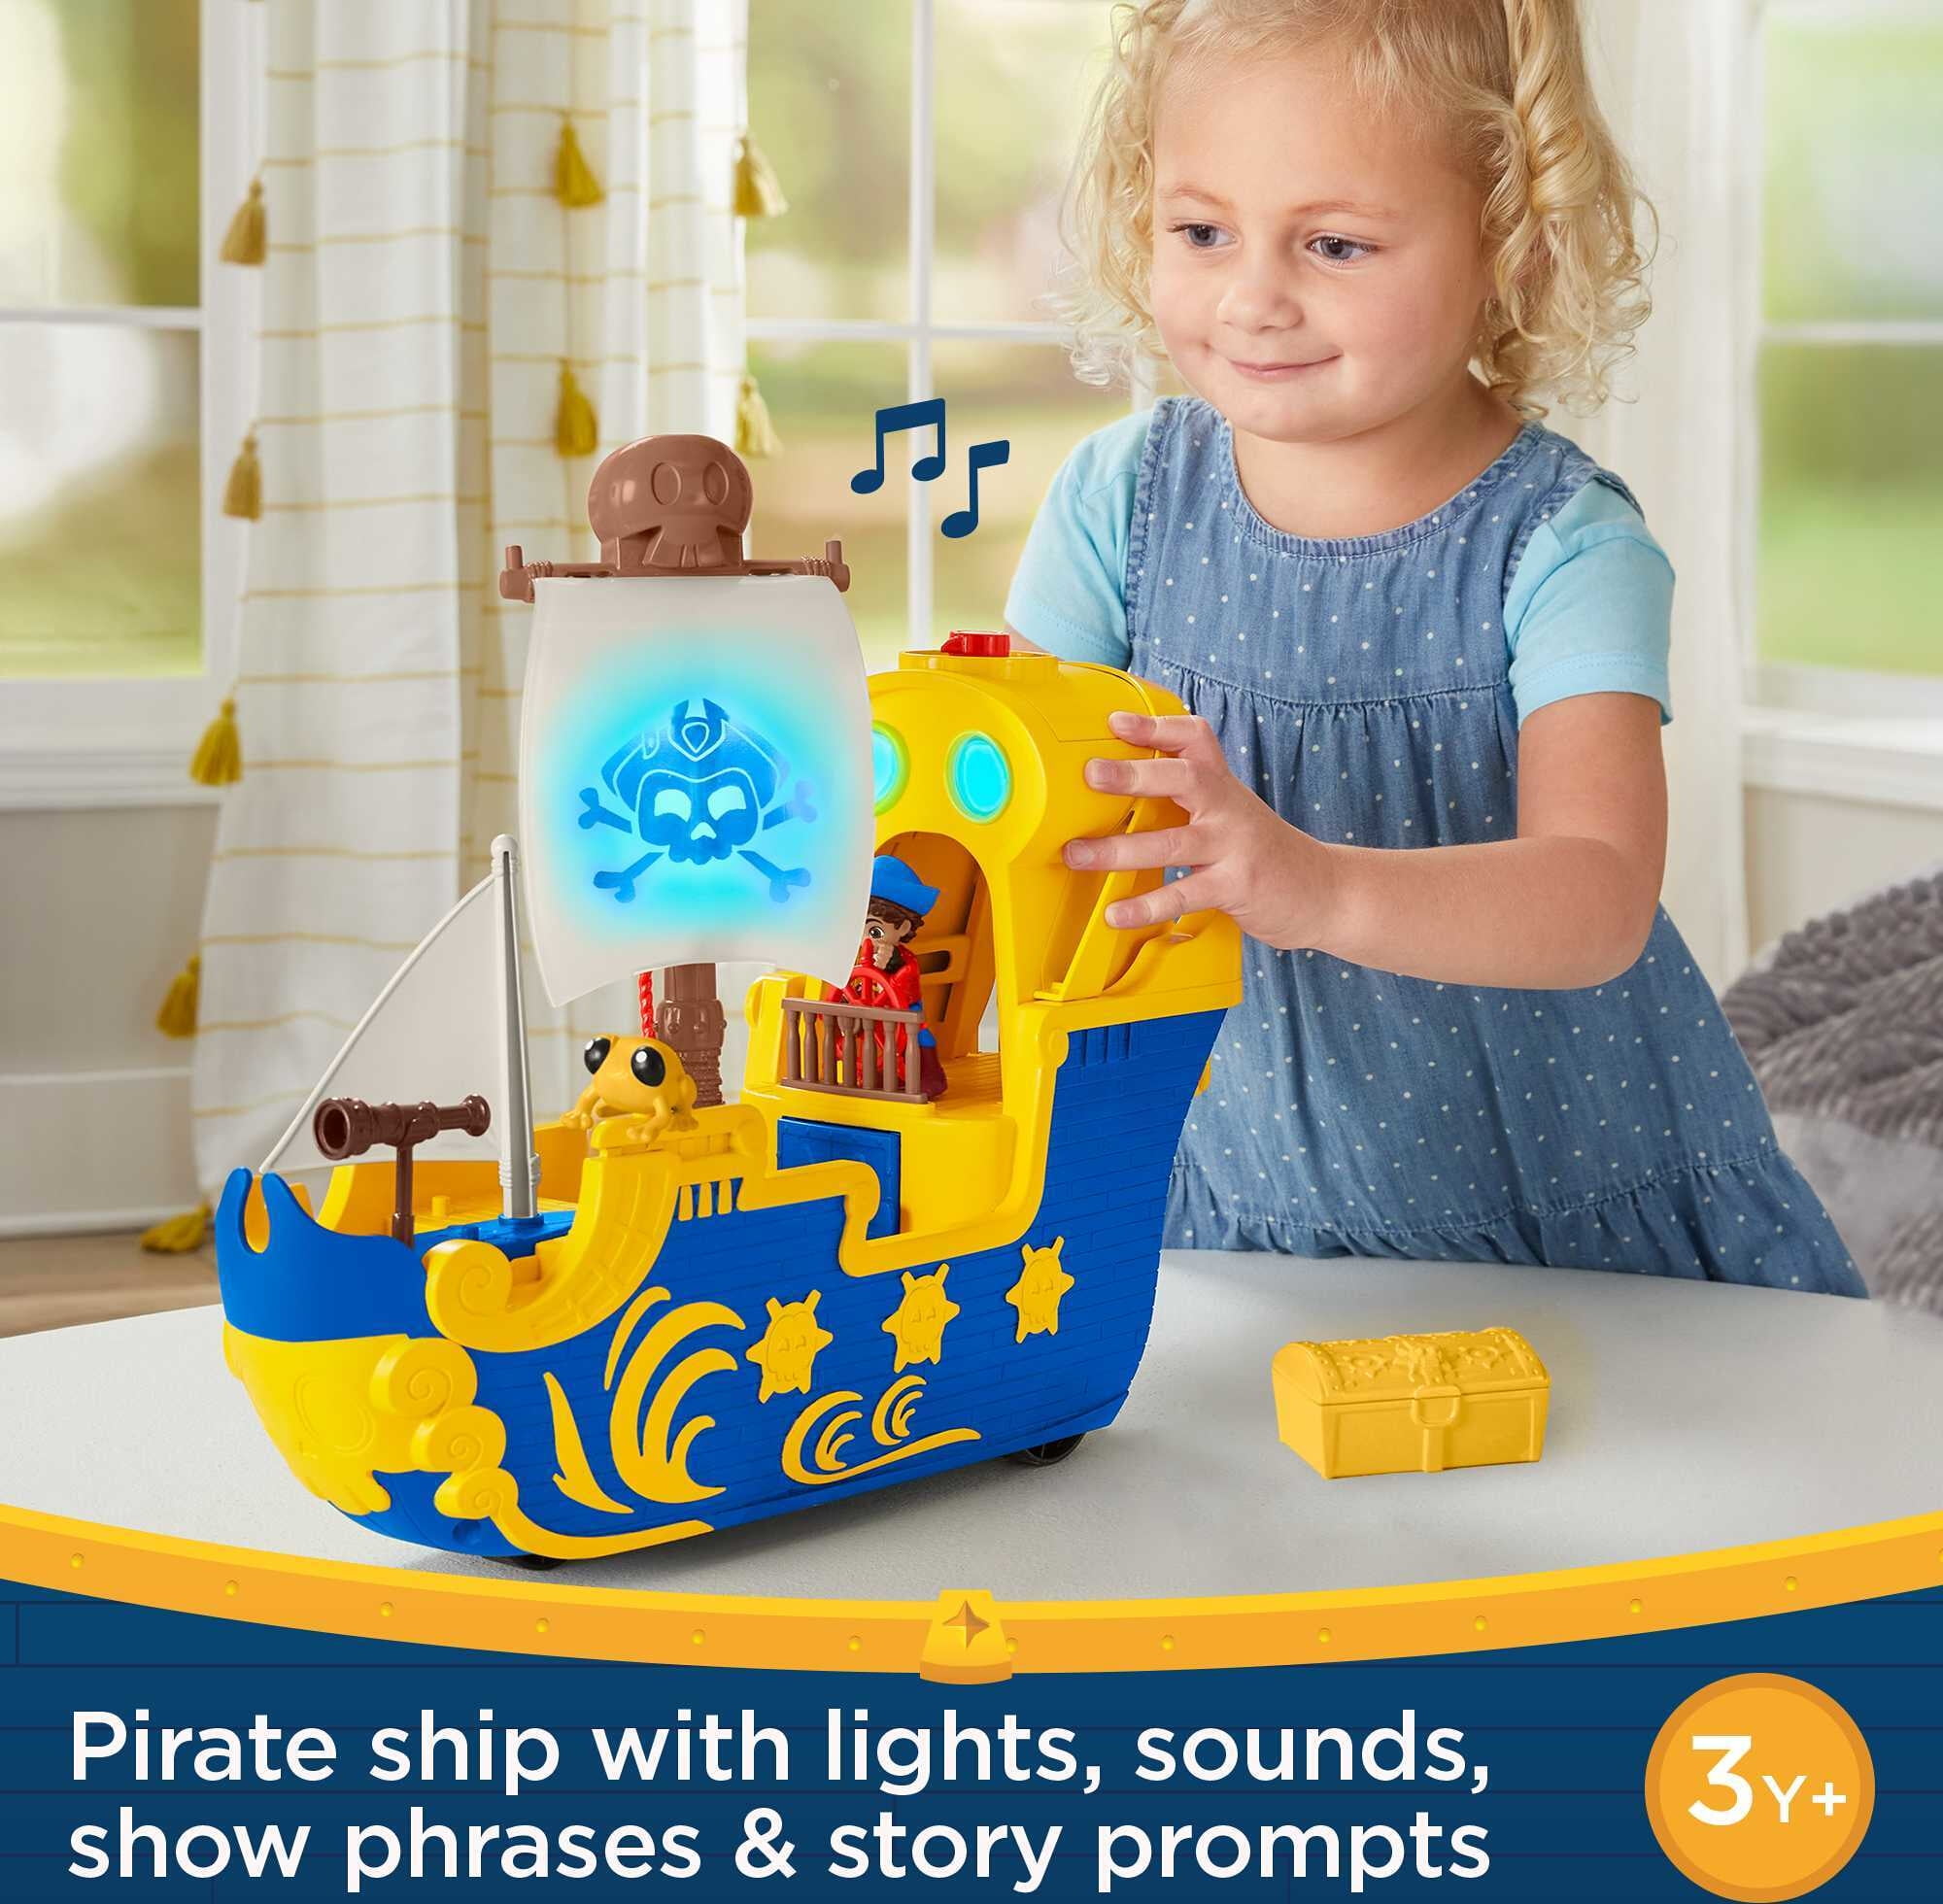 Fisher-Price Santiago of the Seas Pirate Ship El Bravo Playset with Lights & Sounds for Child 3Y+ - 1